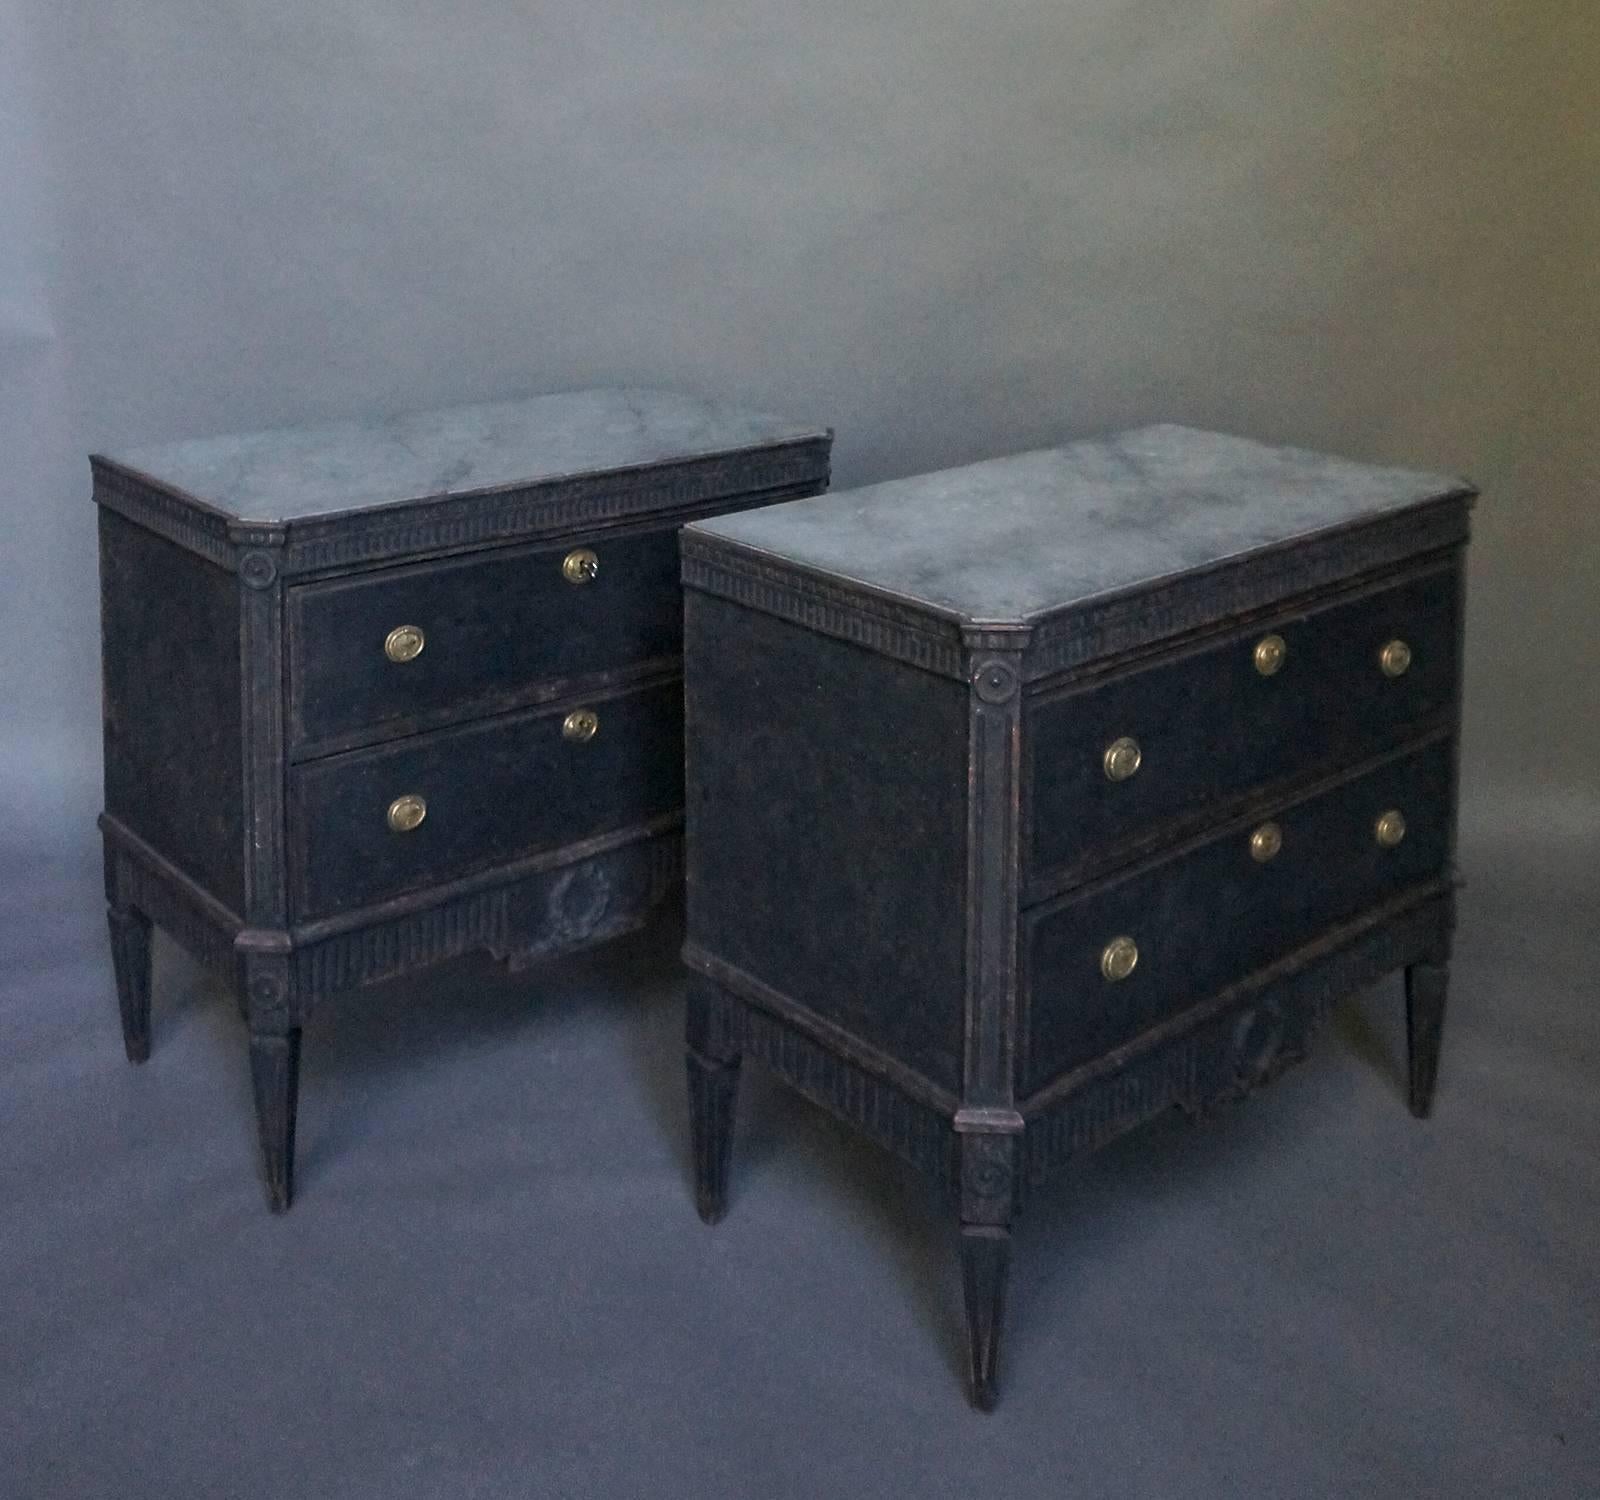 Pair of Swedish two-drawer chests, circa 1870, in the Gustavian style. A double row of dentil molding appears under the marbled top. Canted corners have reeded corner posts with applied rondels at the top and ending in tapering square feet. The